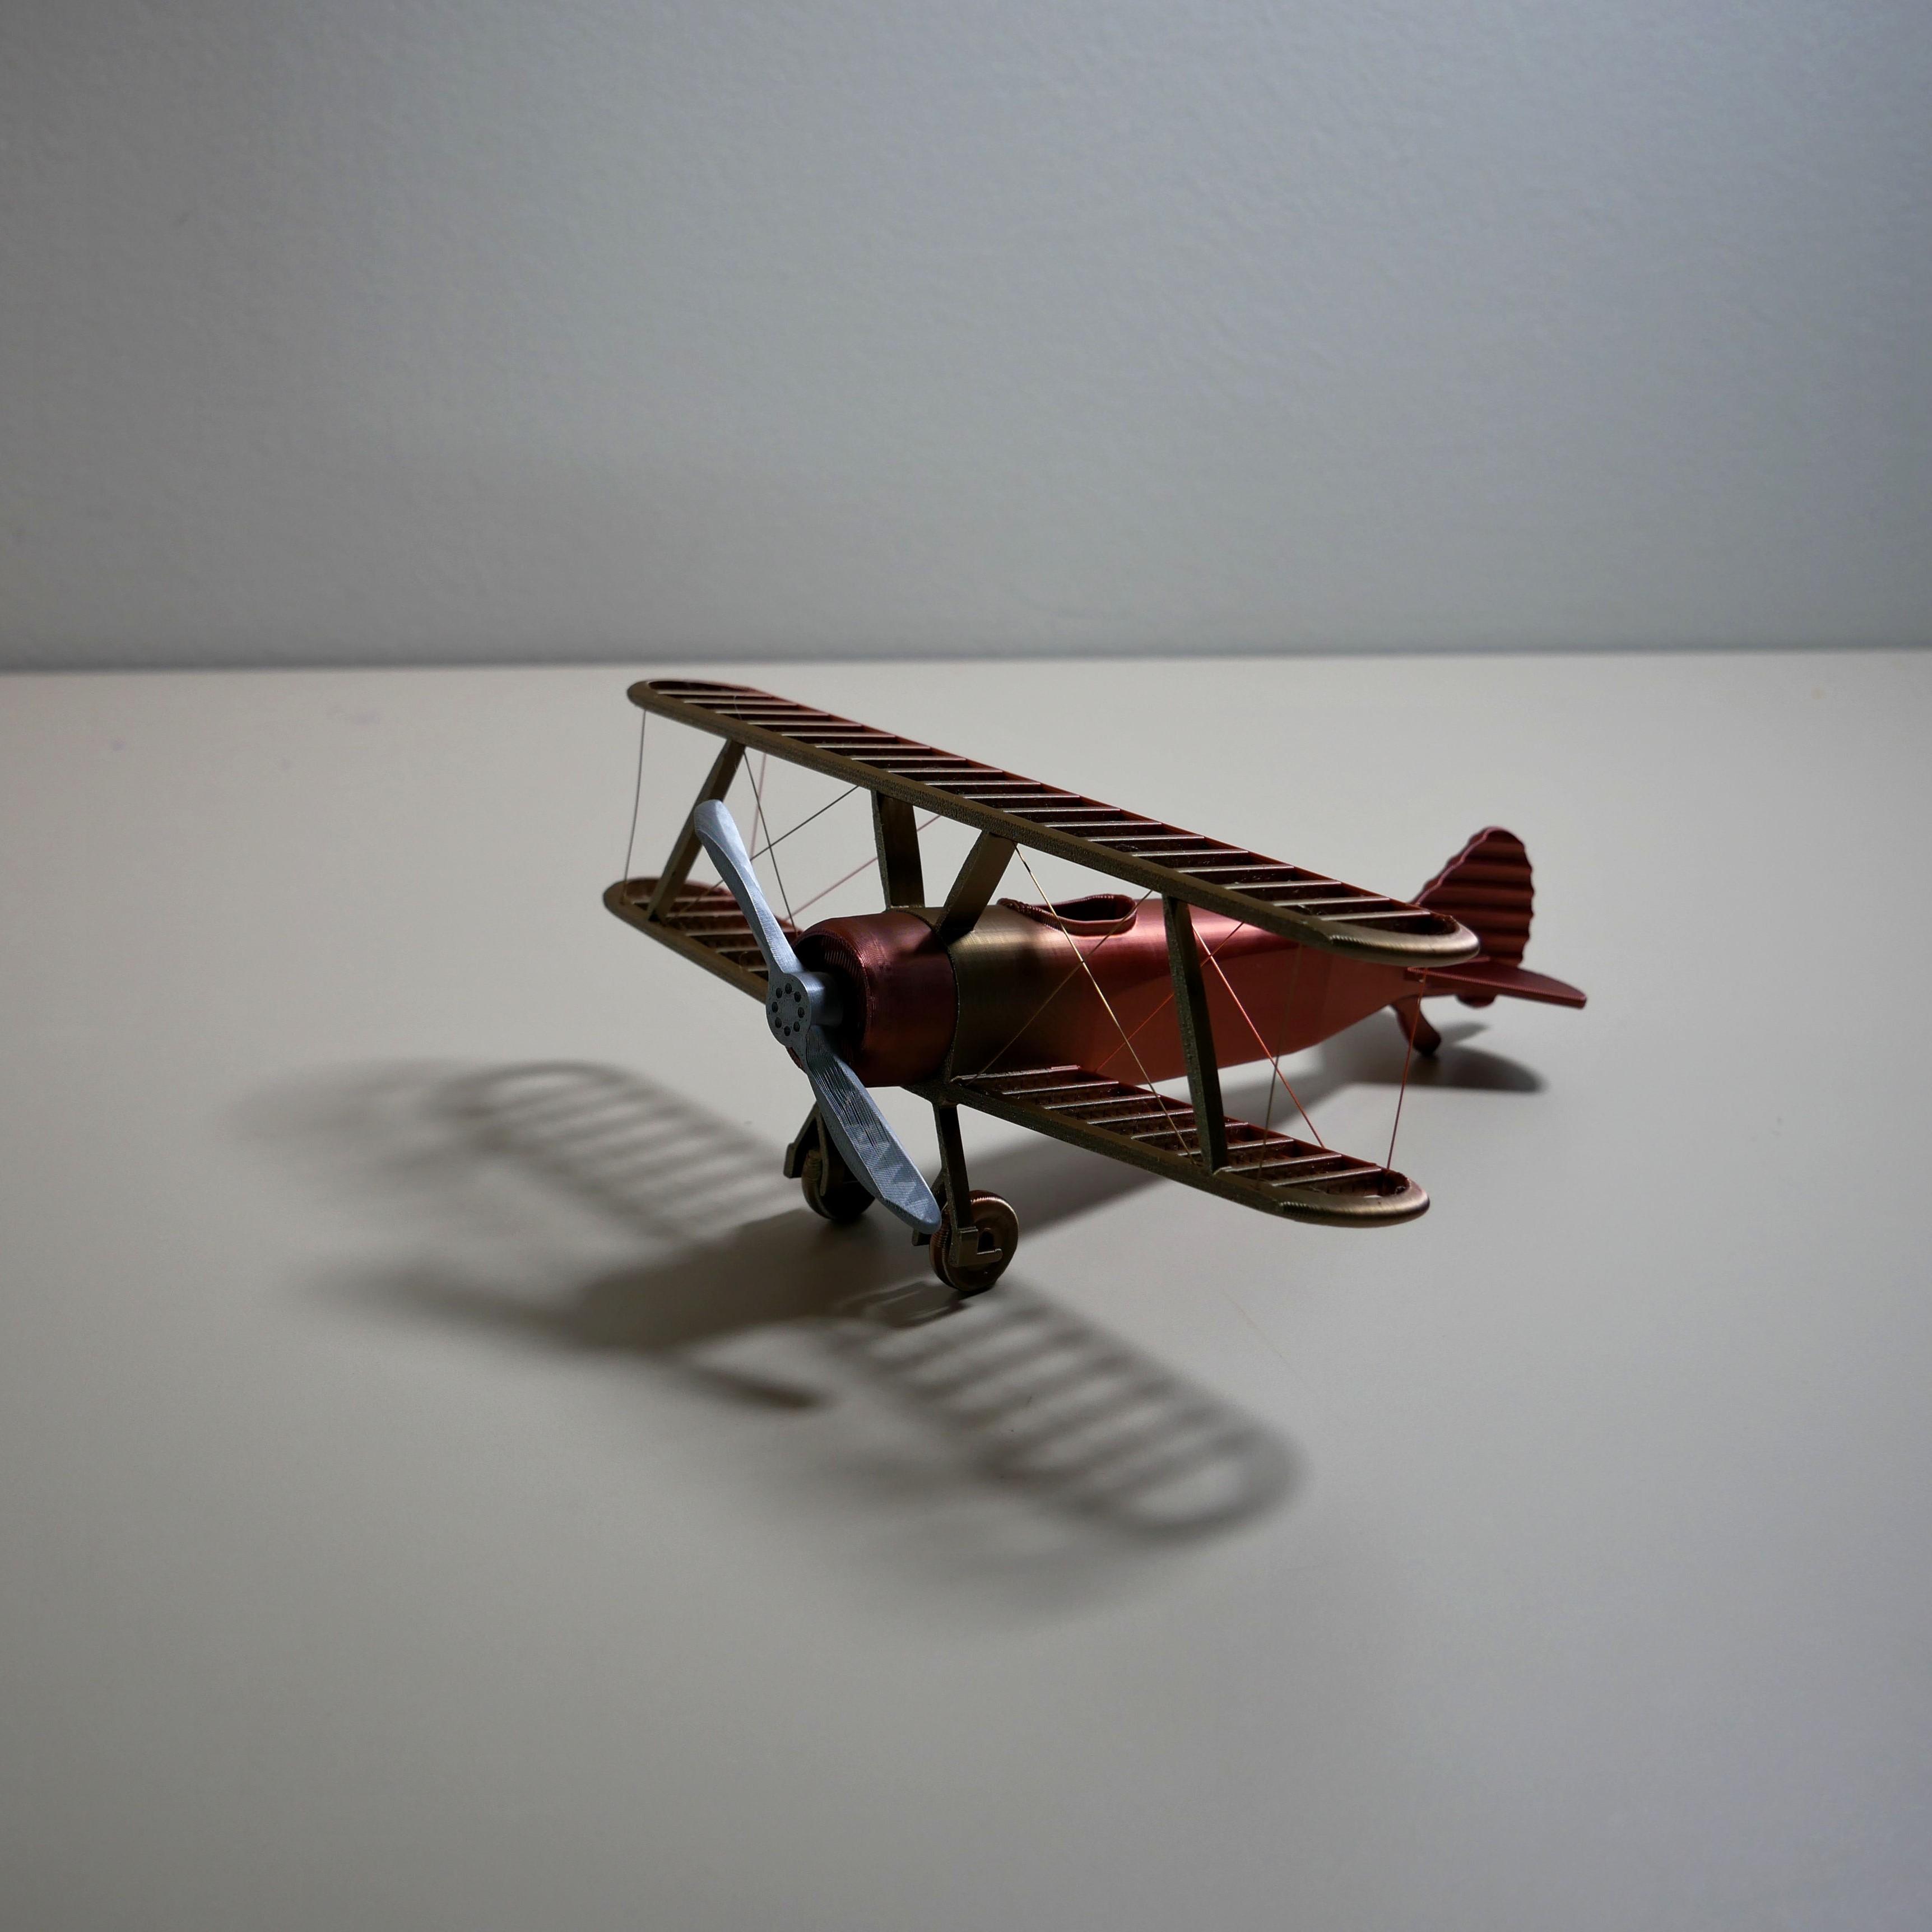 String Biplane with hanging rings: No supports 3d model